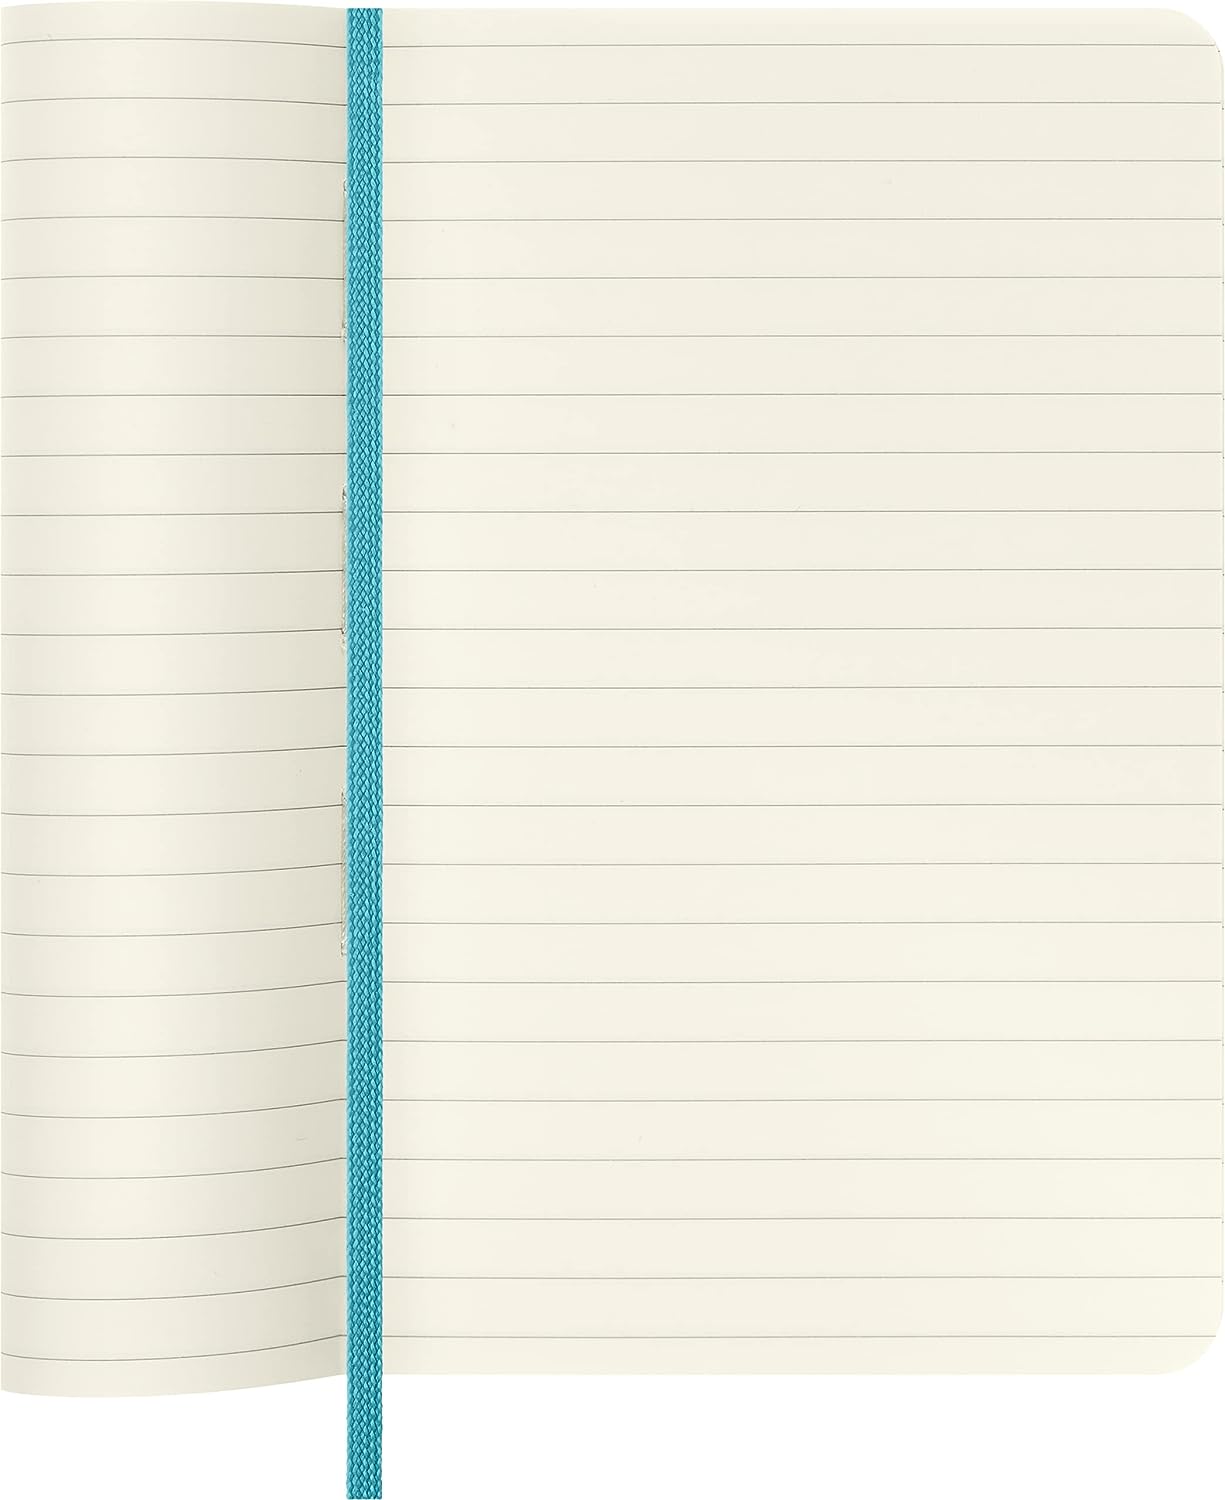 ruled-pocket-soft-cover-notebook-blue-reef